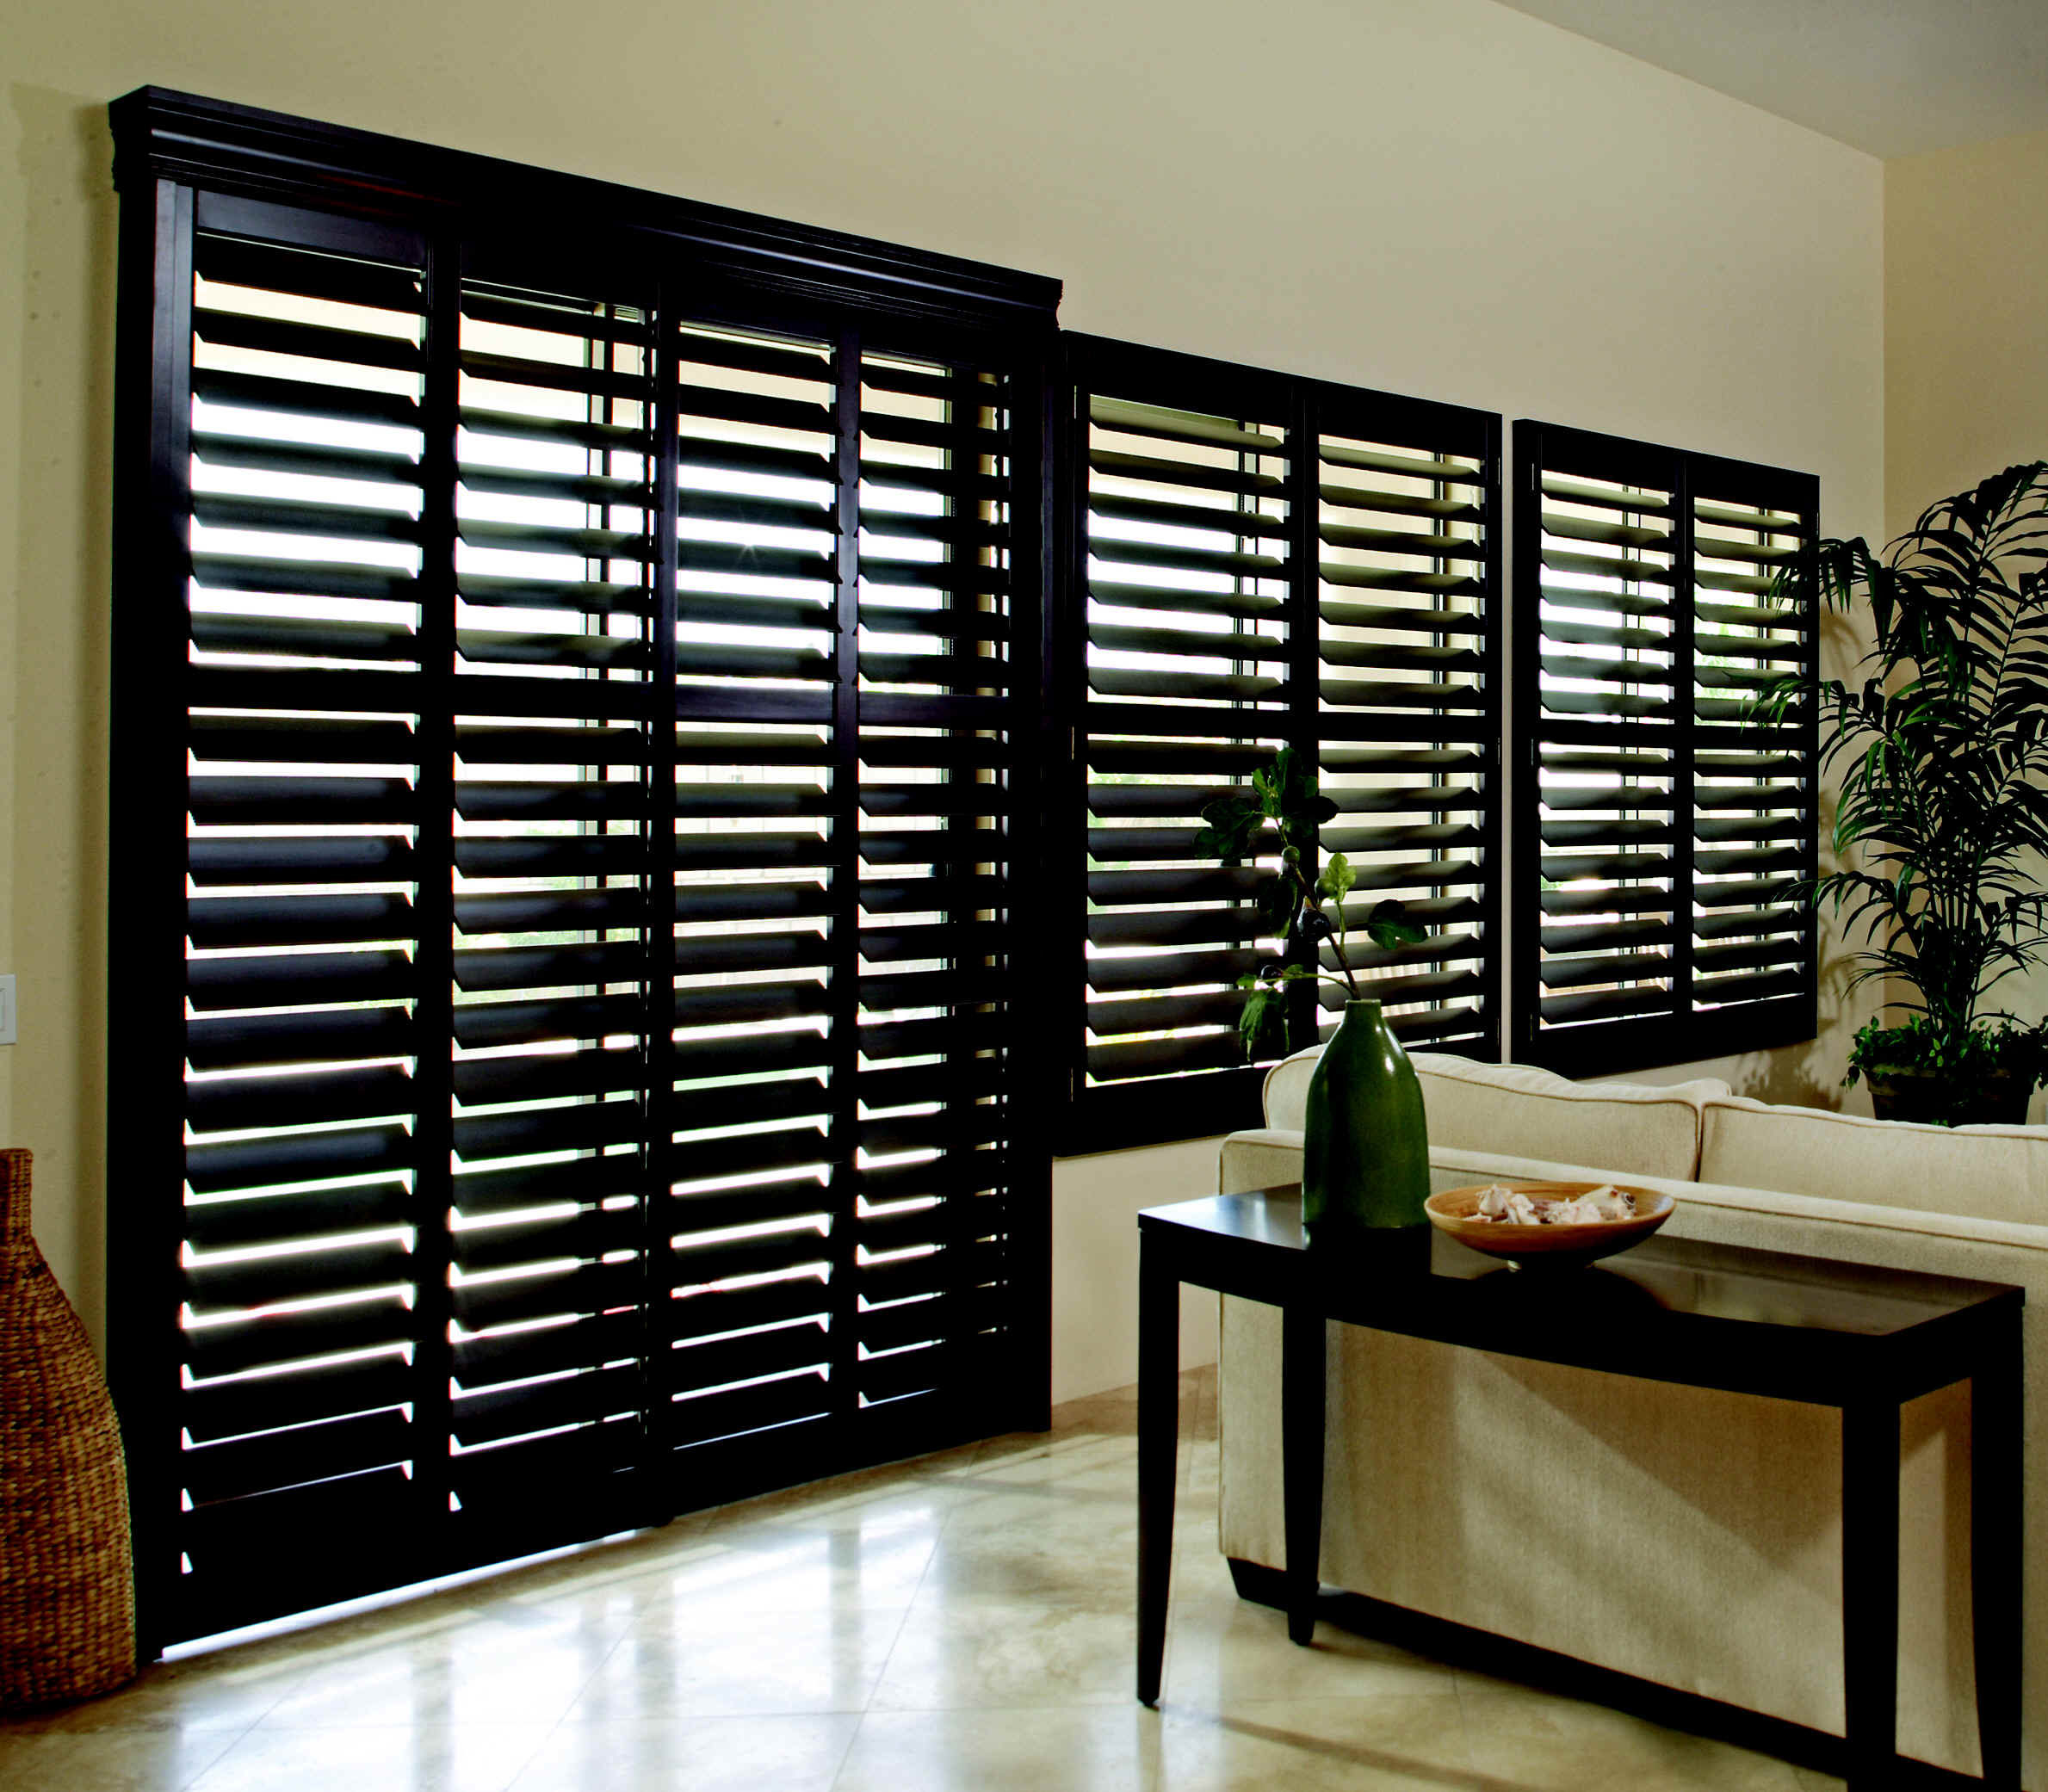 Clearview Shutters For Sale At Low Prices in Franklin